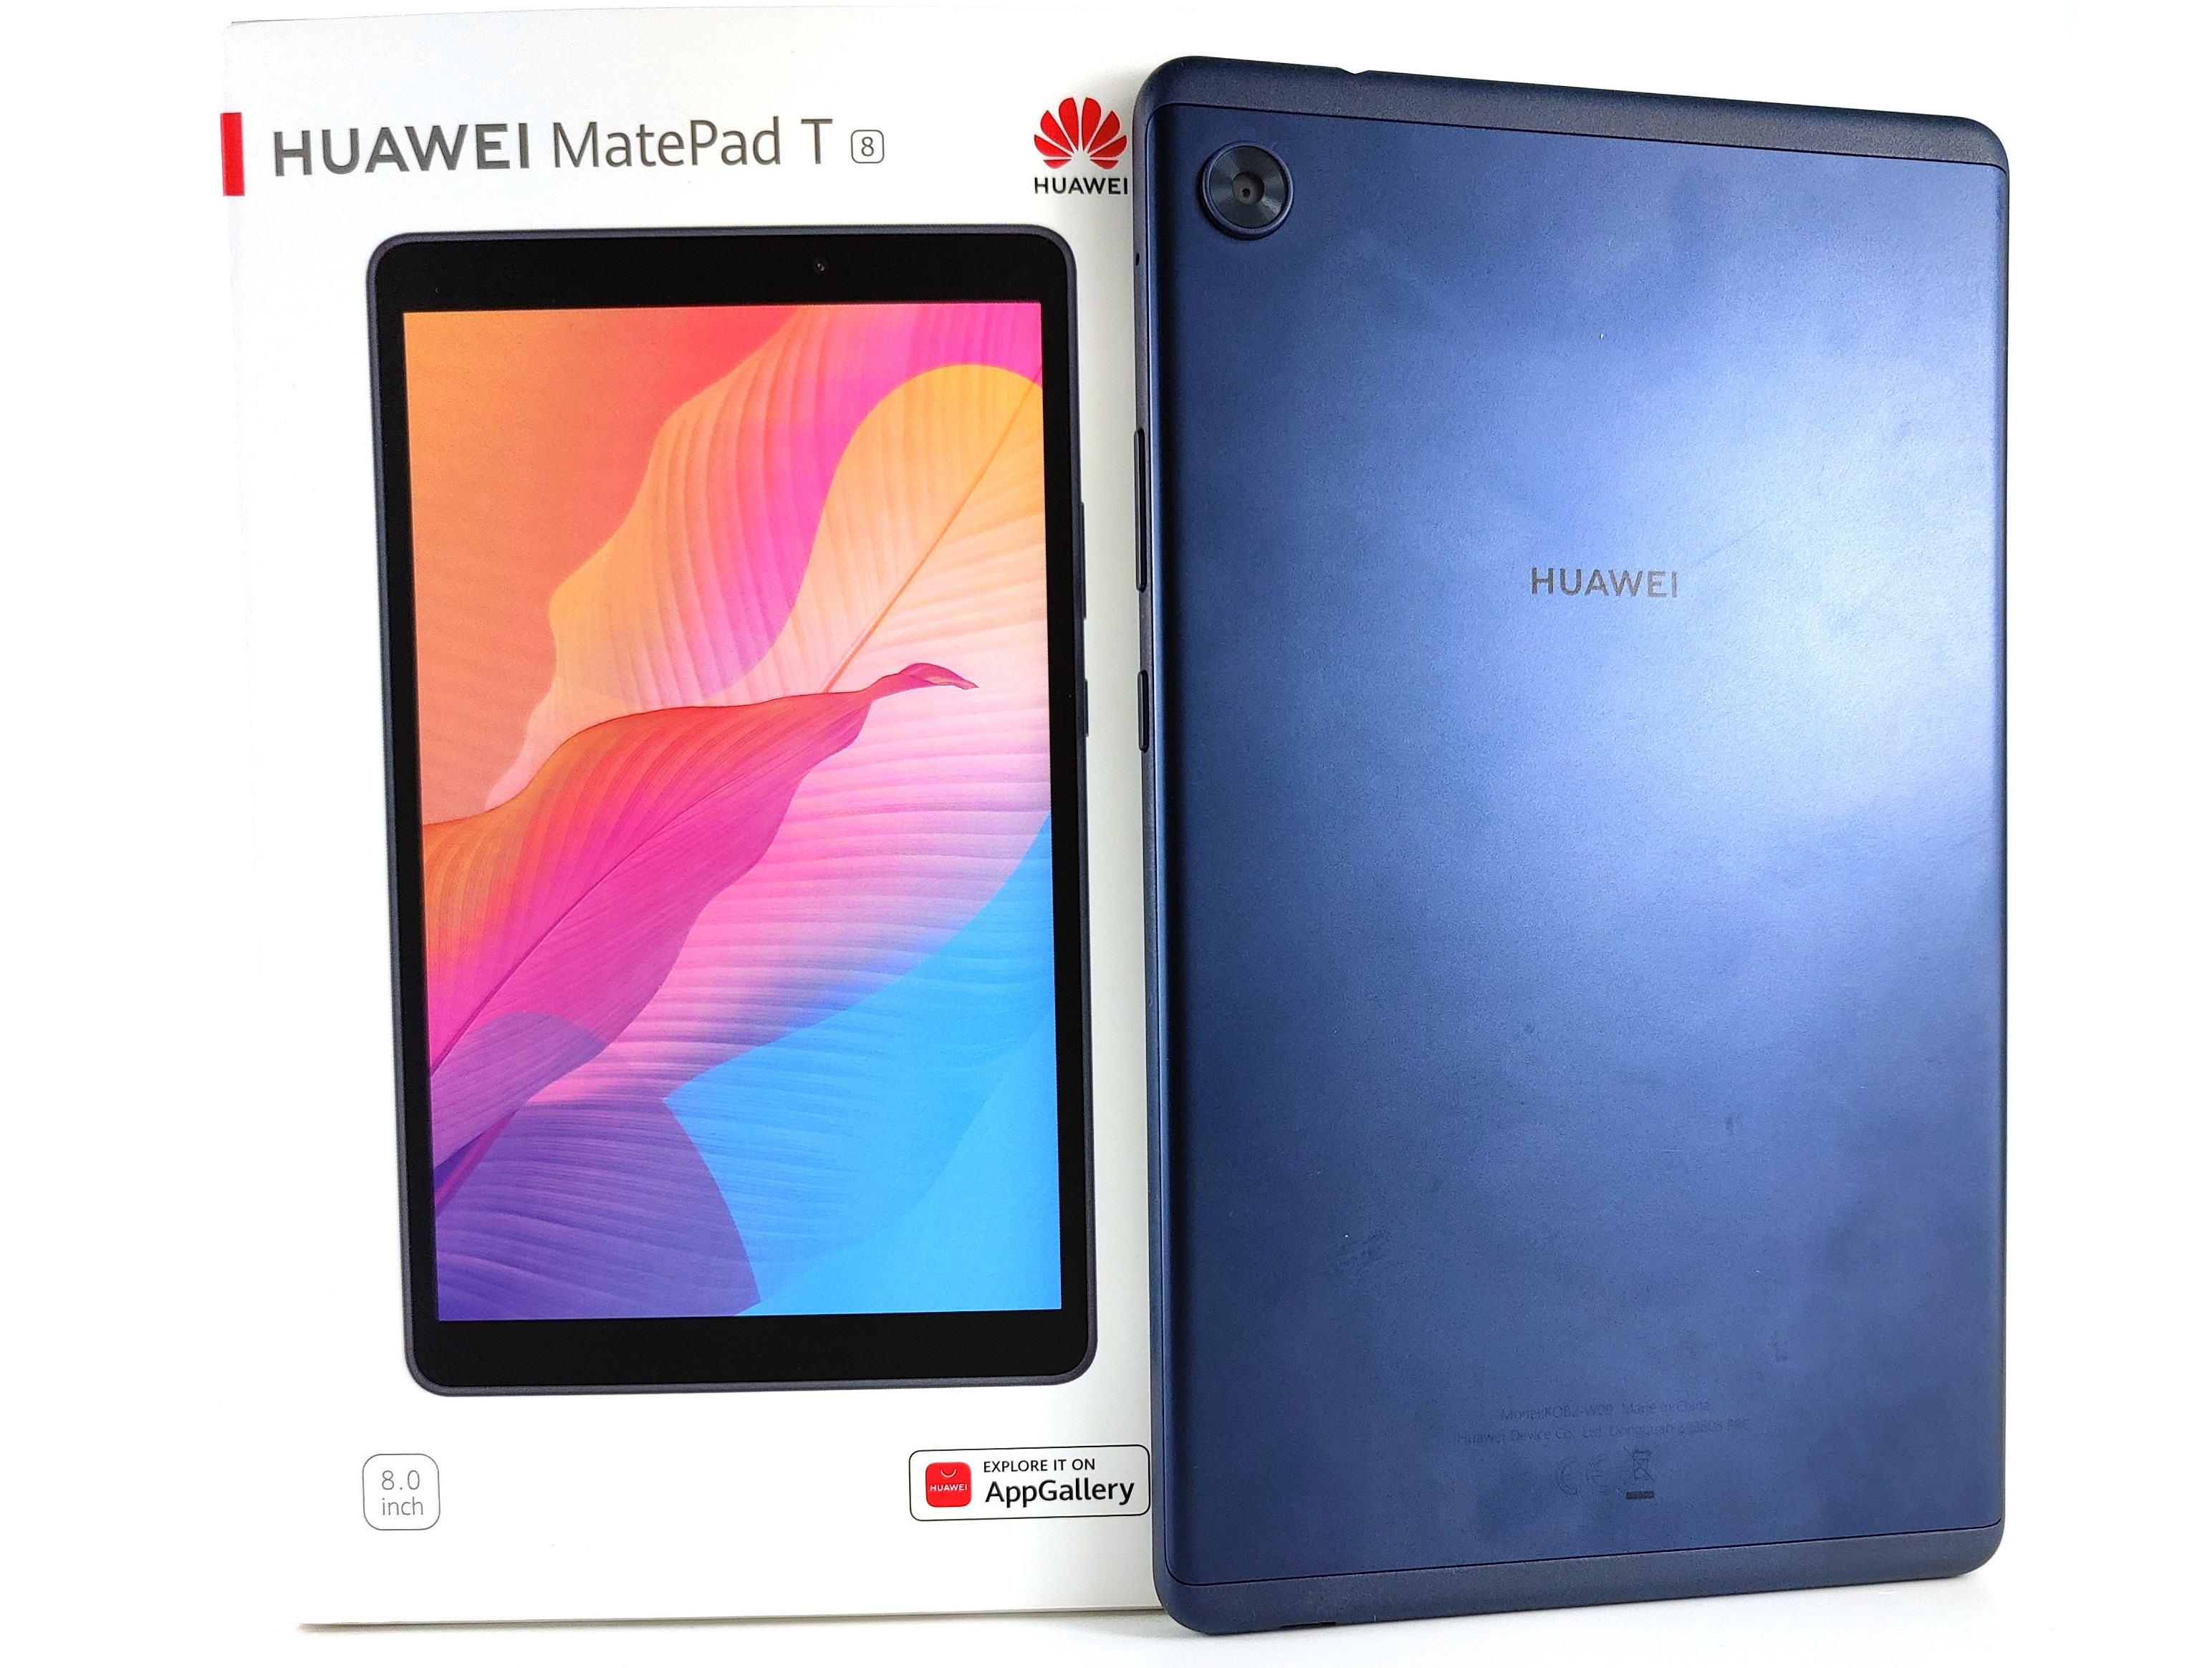 Huawei MatePad T8 Tablet Review - Is the 99-Euro (~$117) tablet worth it? -   Reviews